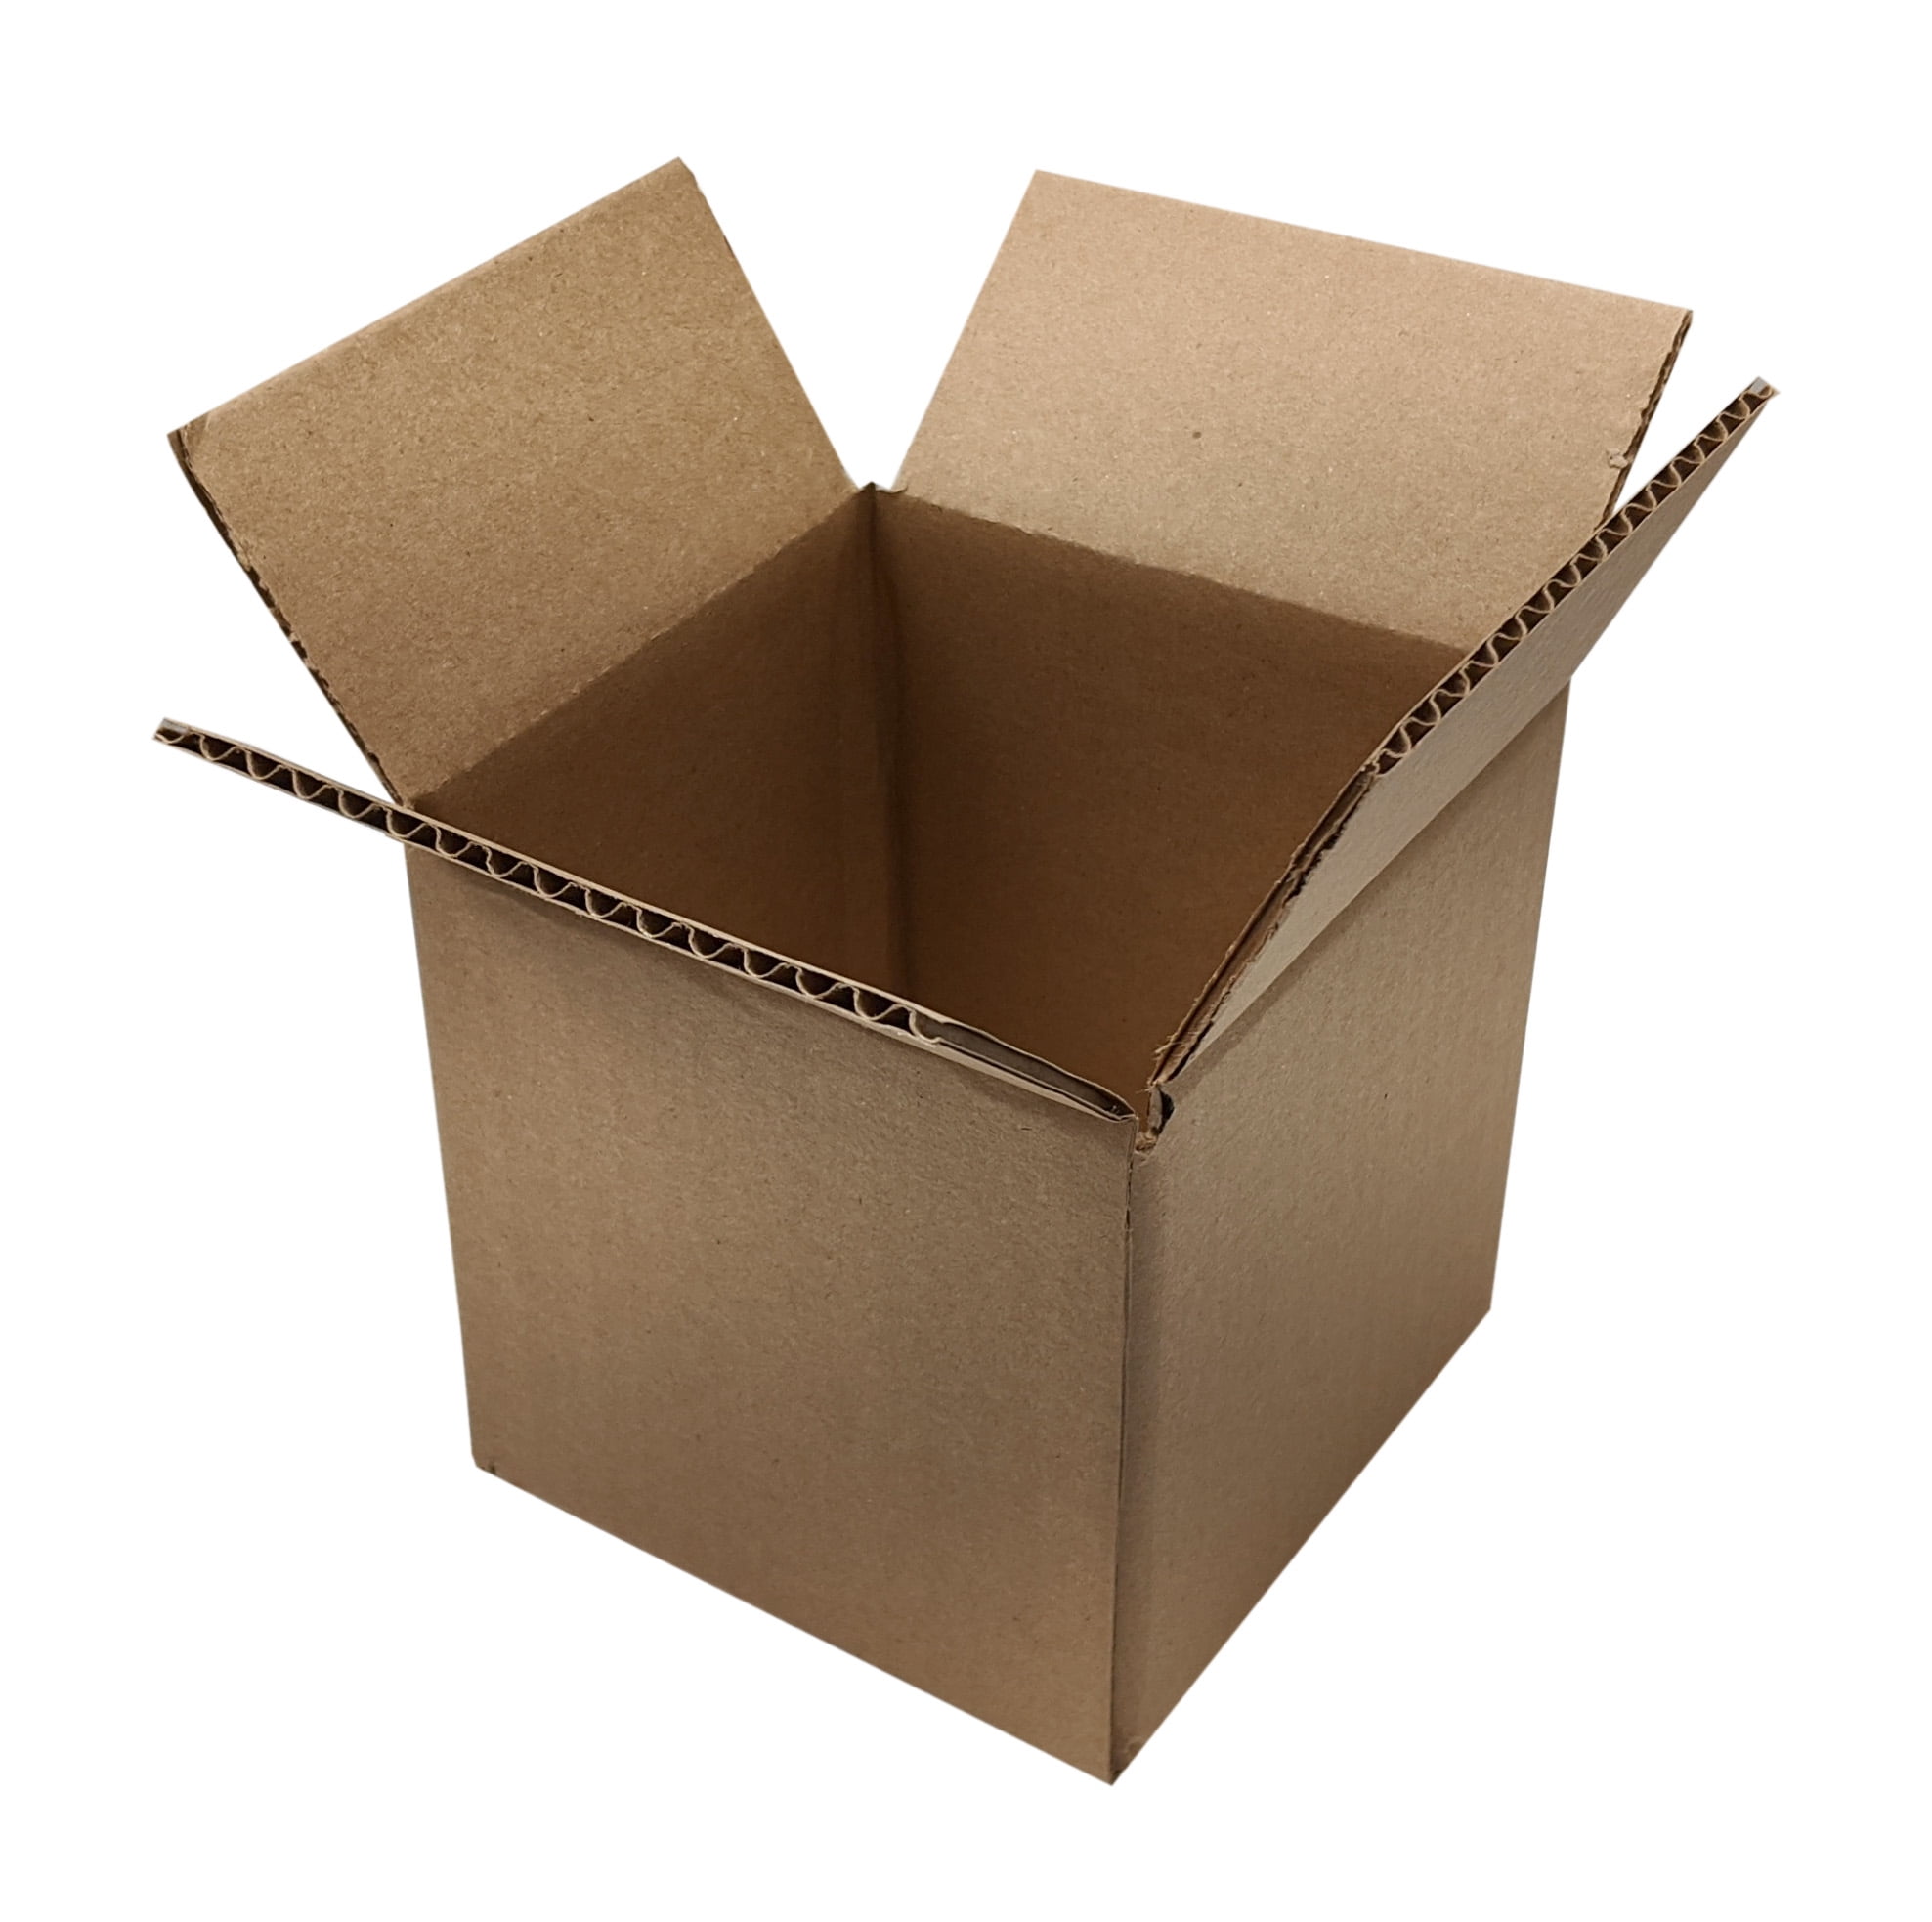 10" x 10" x 6" Cardboard Corrugated Boxes ECT-32 Lot of 25 65 lbs Capacity 